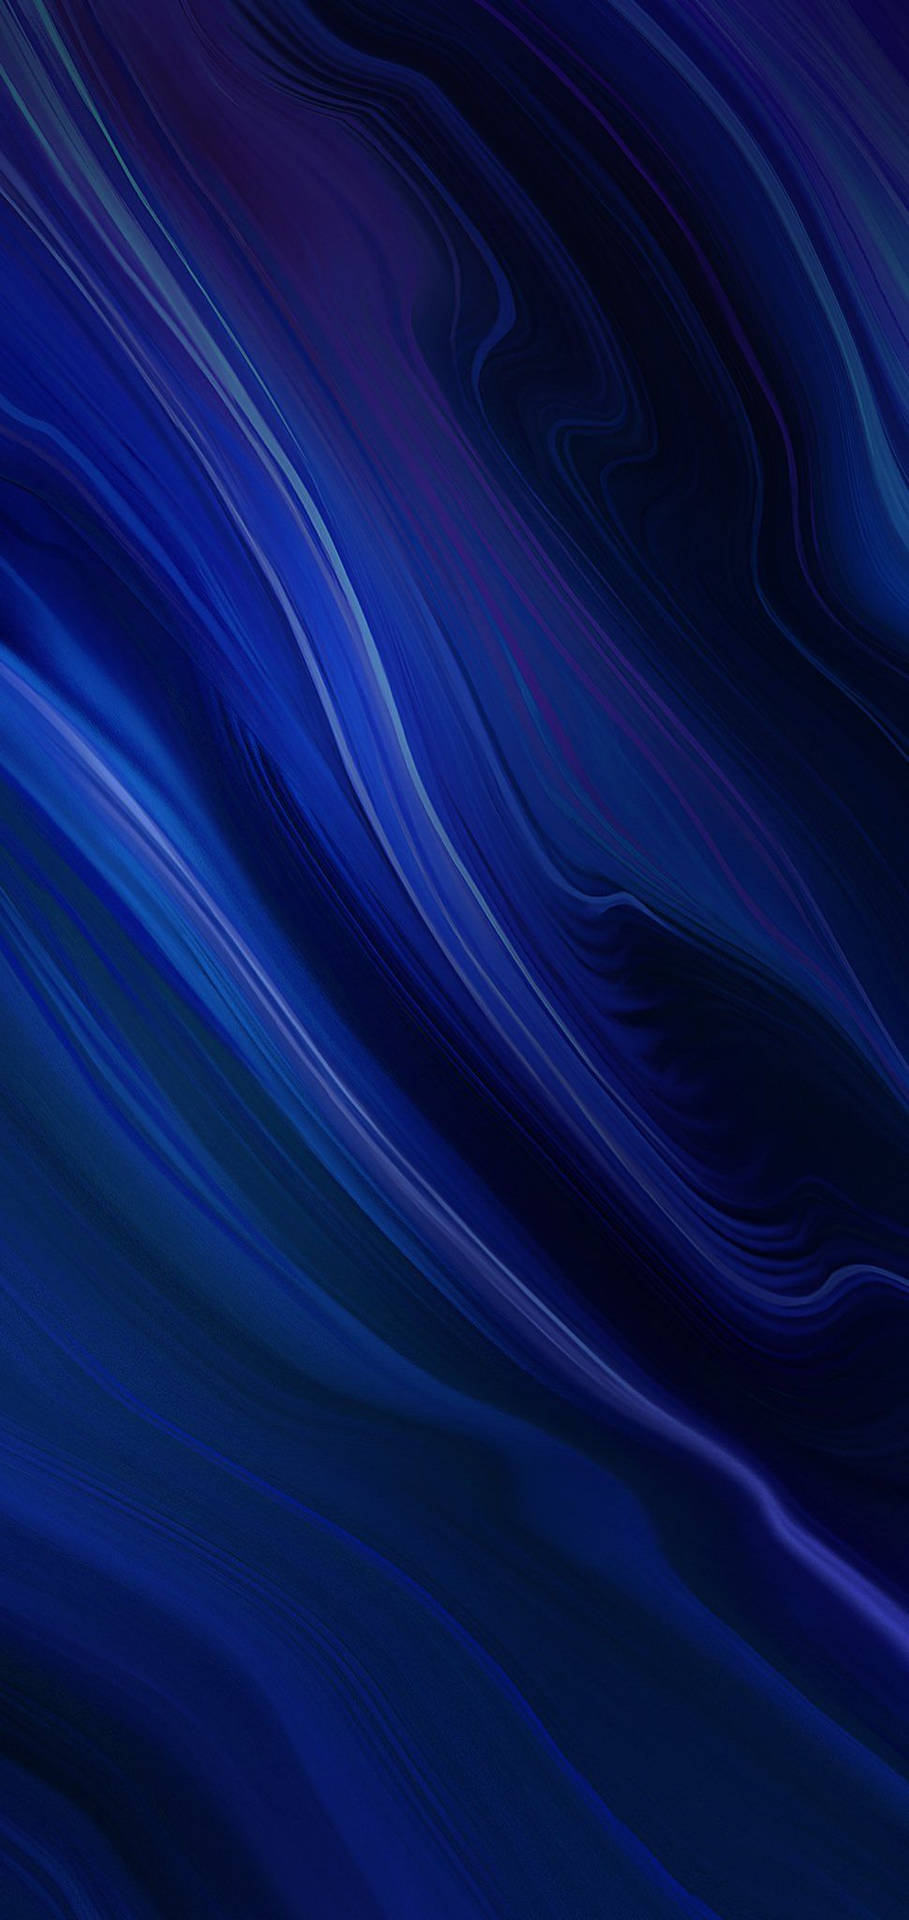 The Luxury Navy Blue iPhone Wallpaper